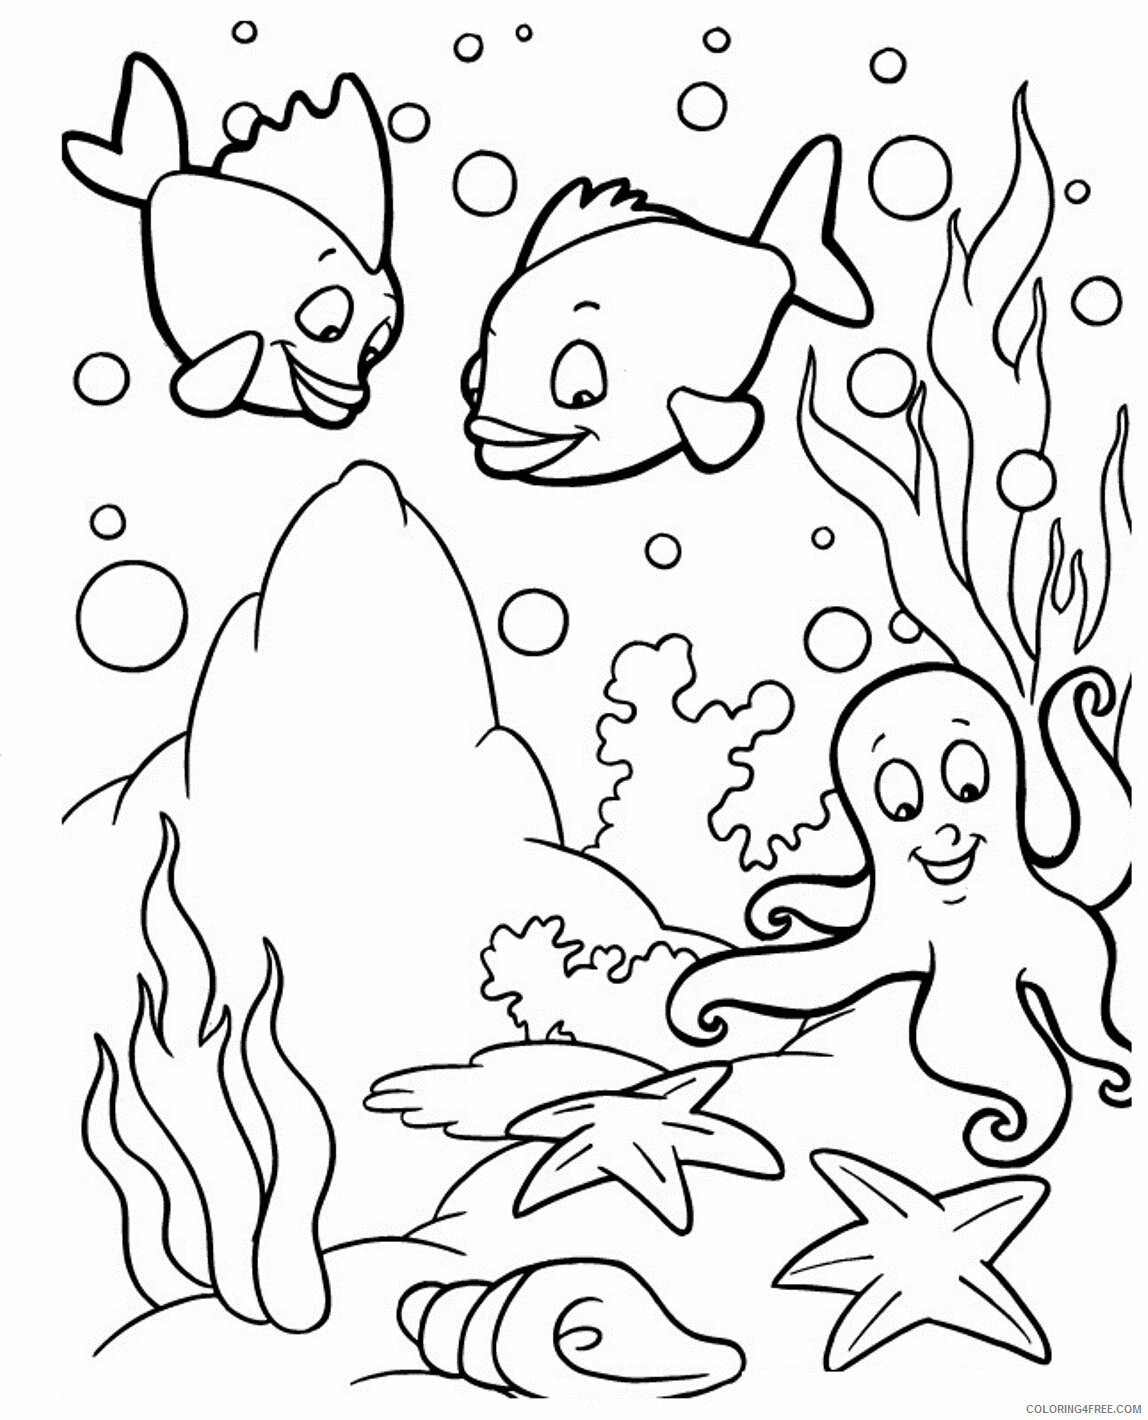 Animal Coloring Pages for Children Printable Sheets Amazing of Elegant Free 2021 a 0217 Coloring4free